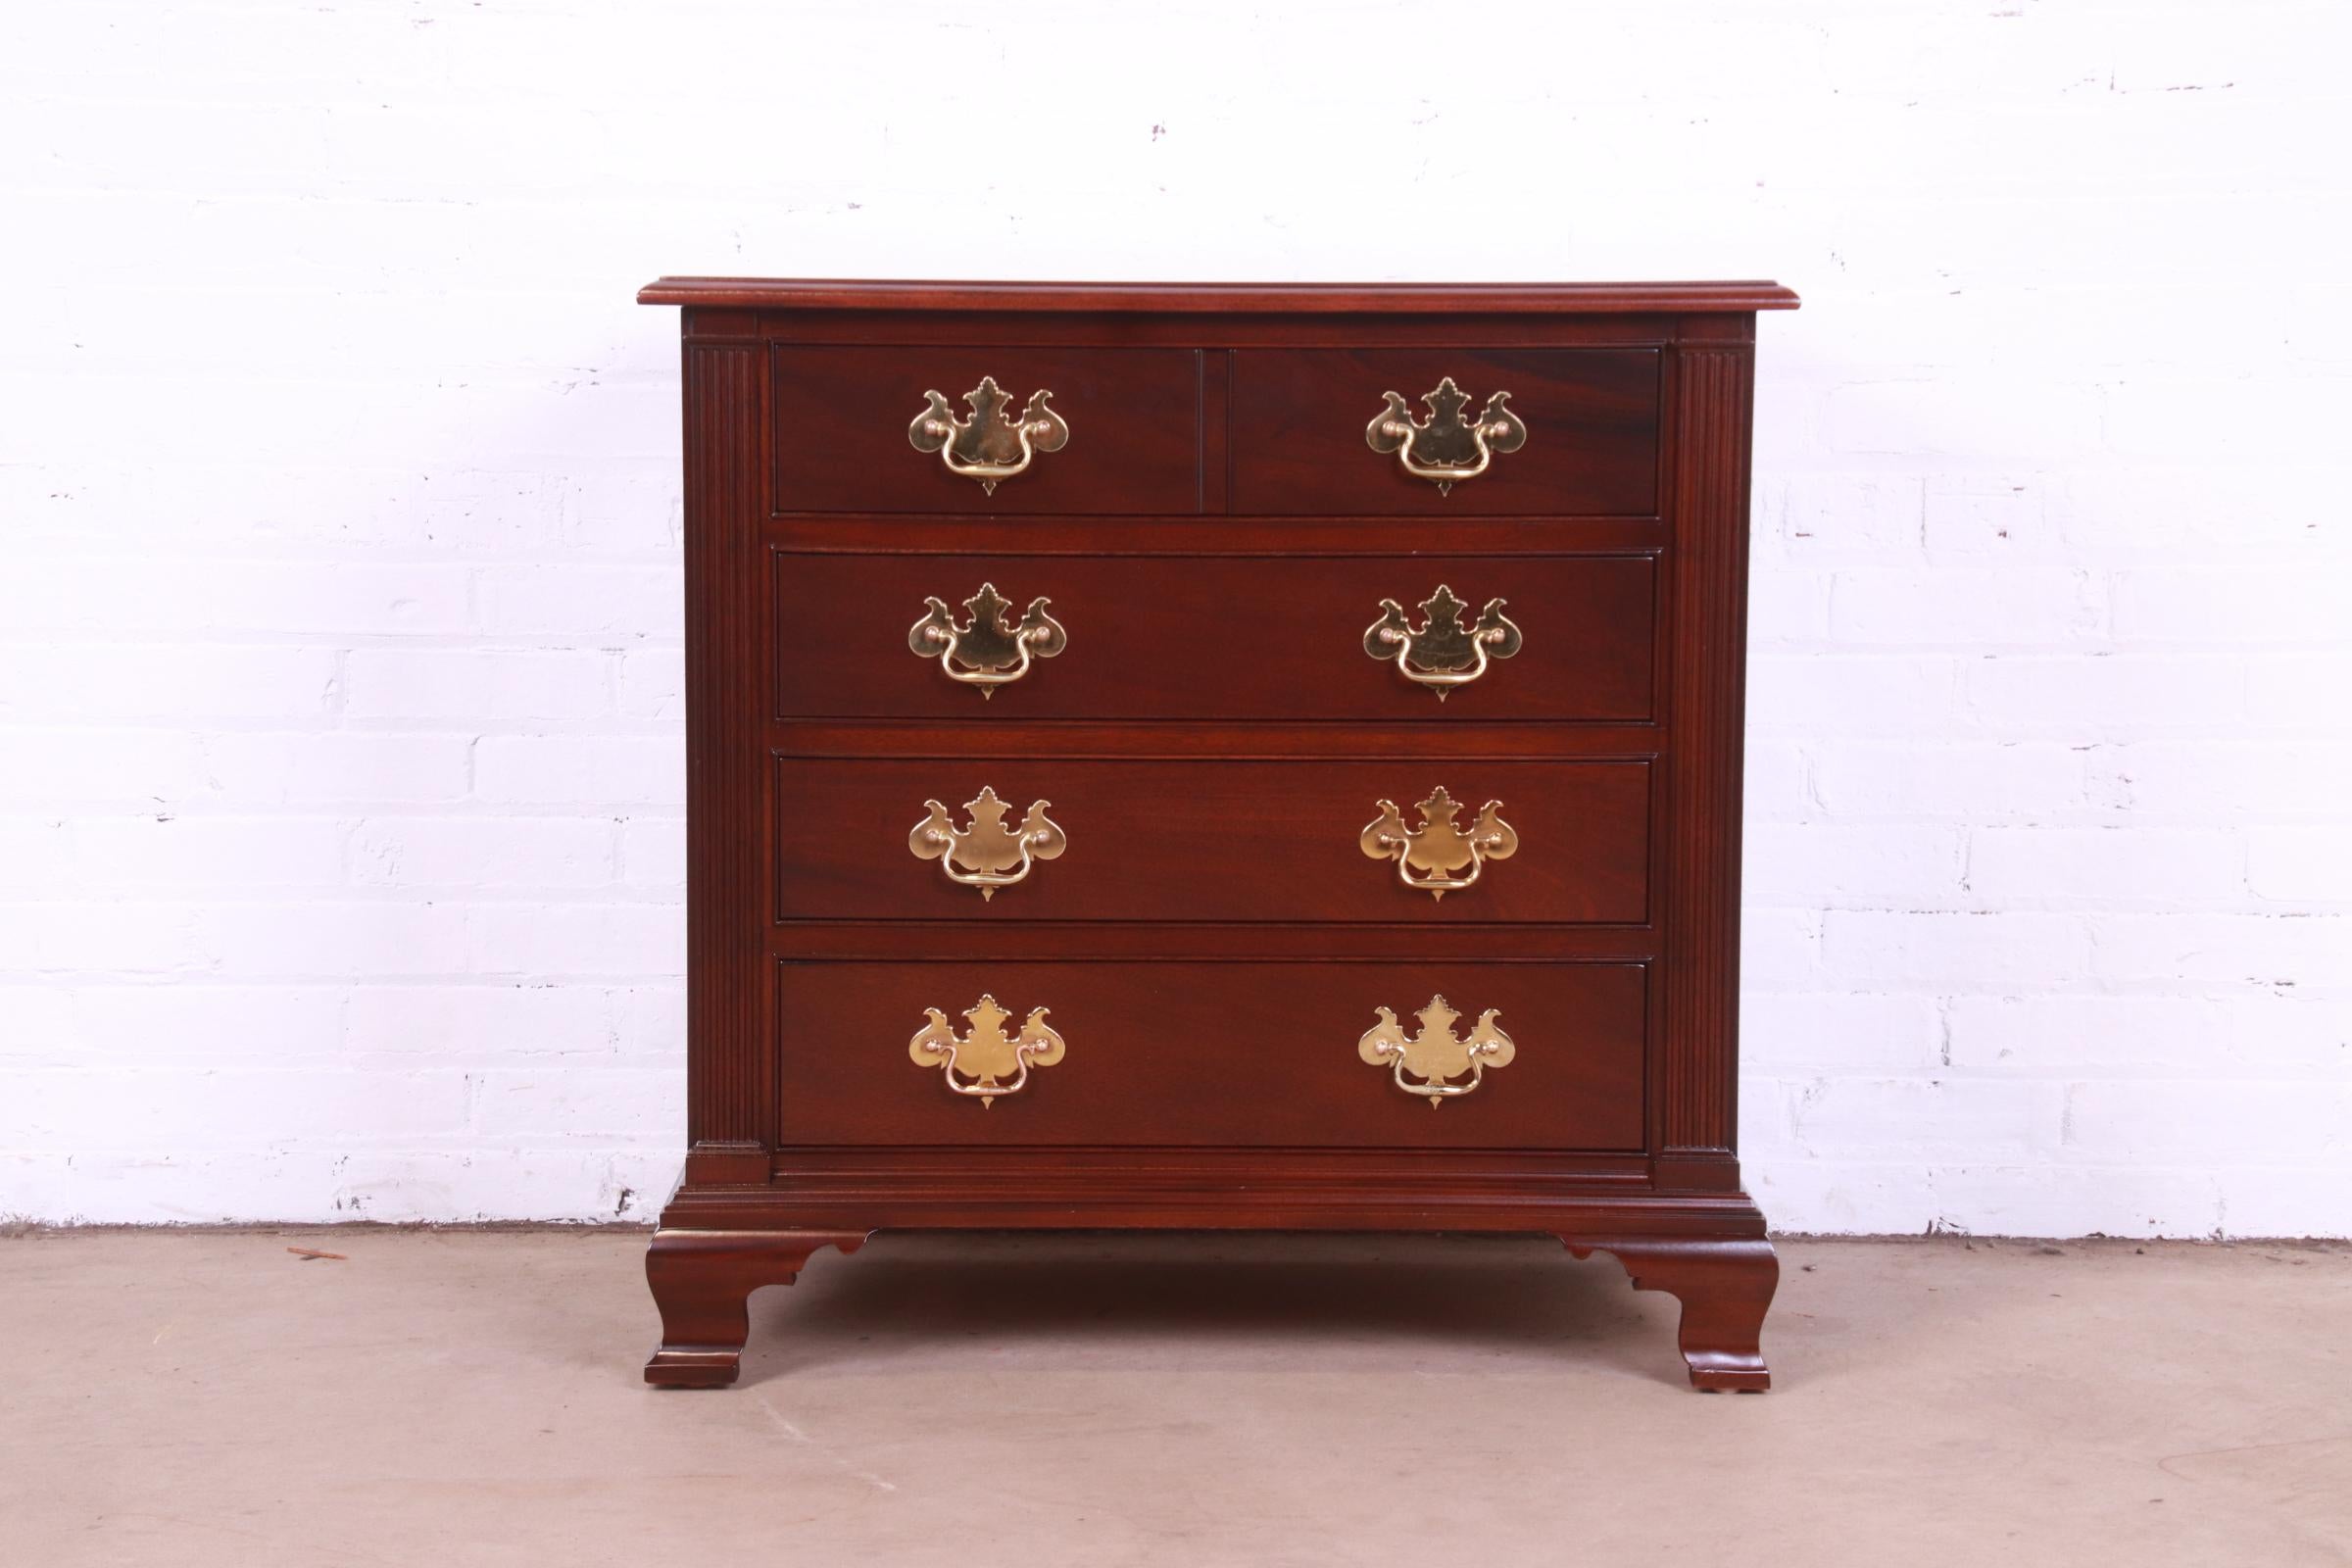 An exceptional Georgian or Chippendale style four-drawer dresser or chest of drawers

By Stickley, 